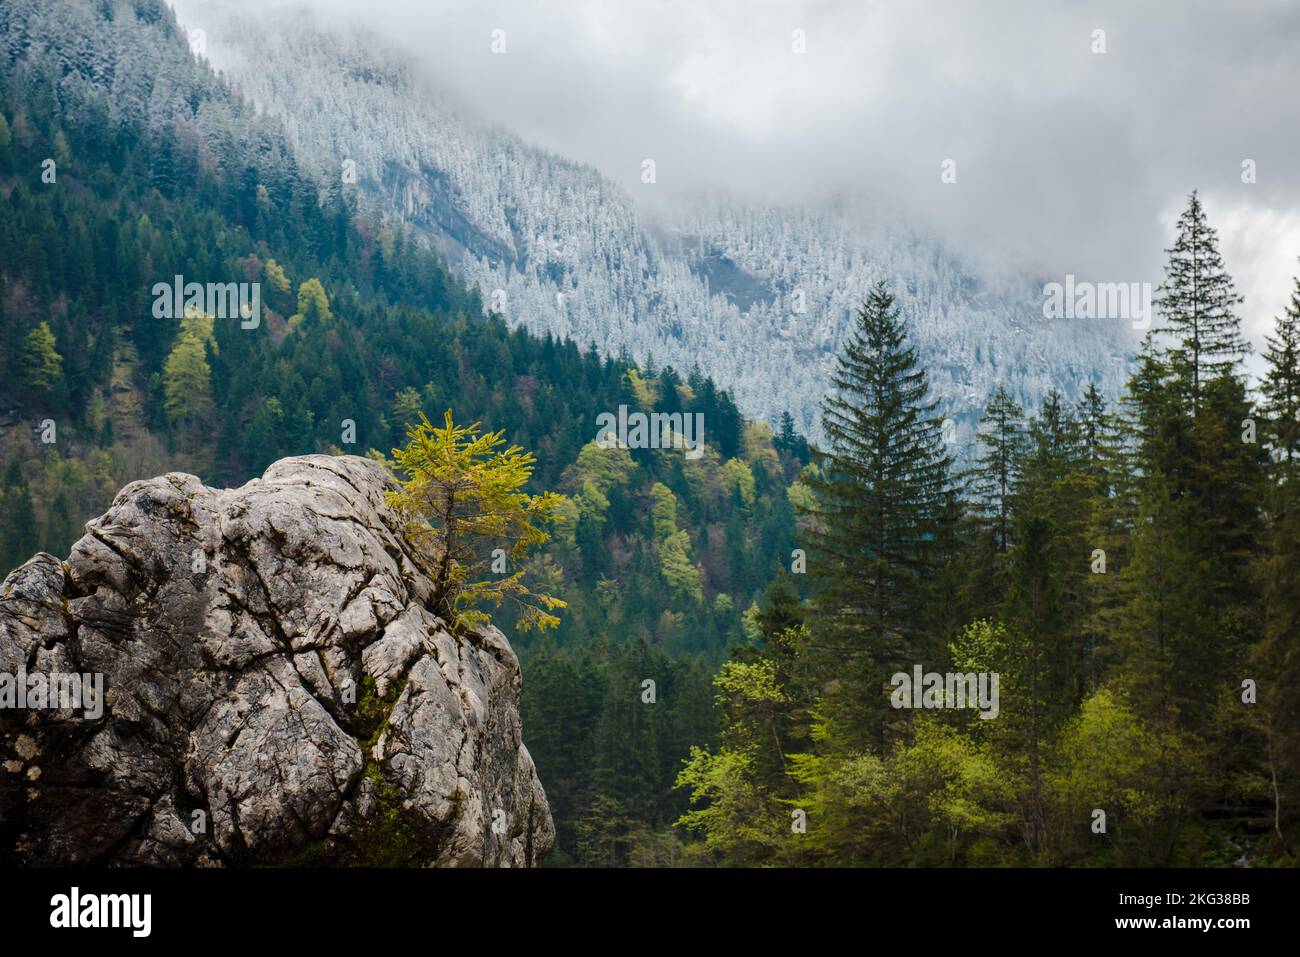 Young fir tree grows in Alps mountains forest Stock Photo